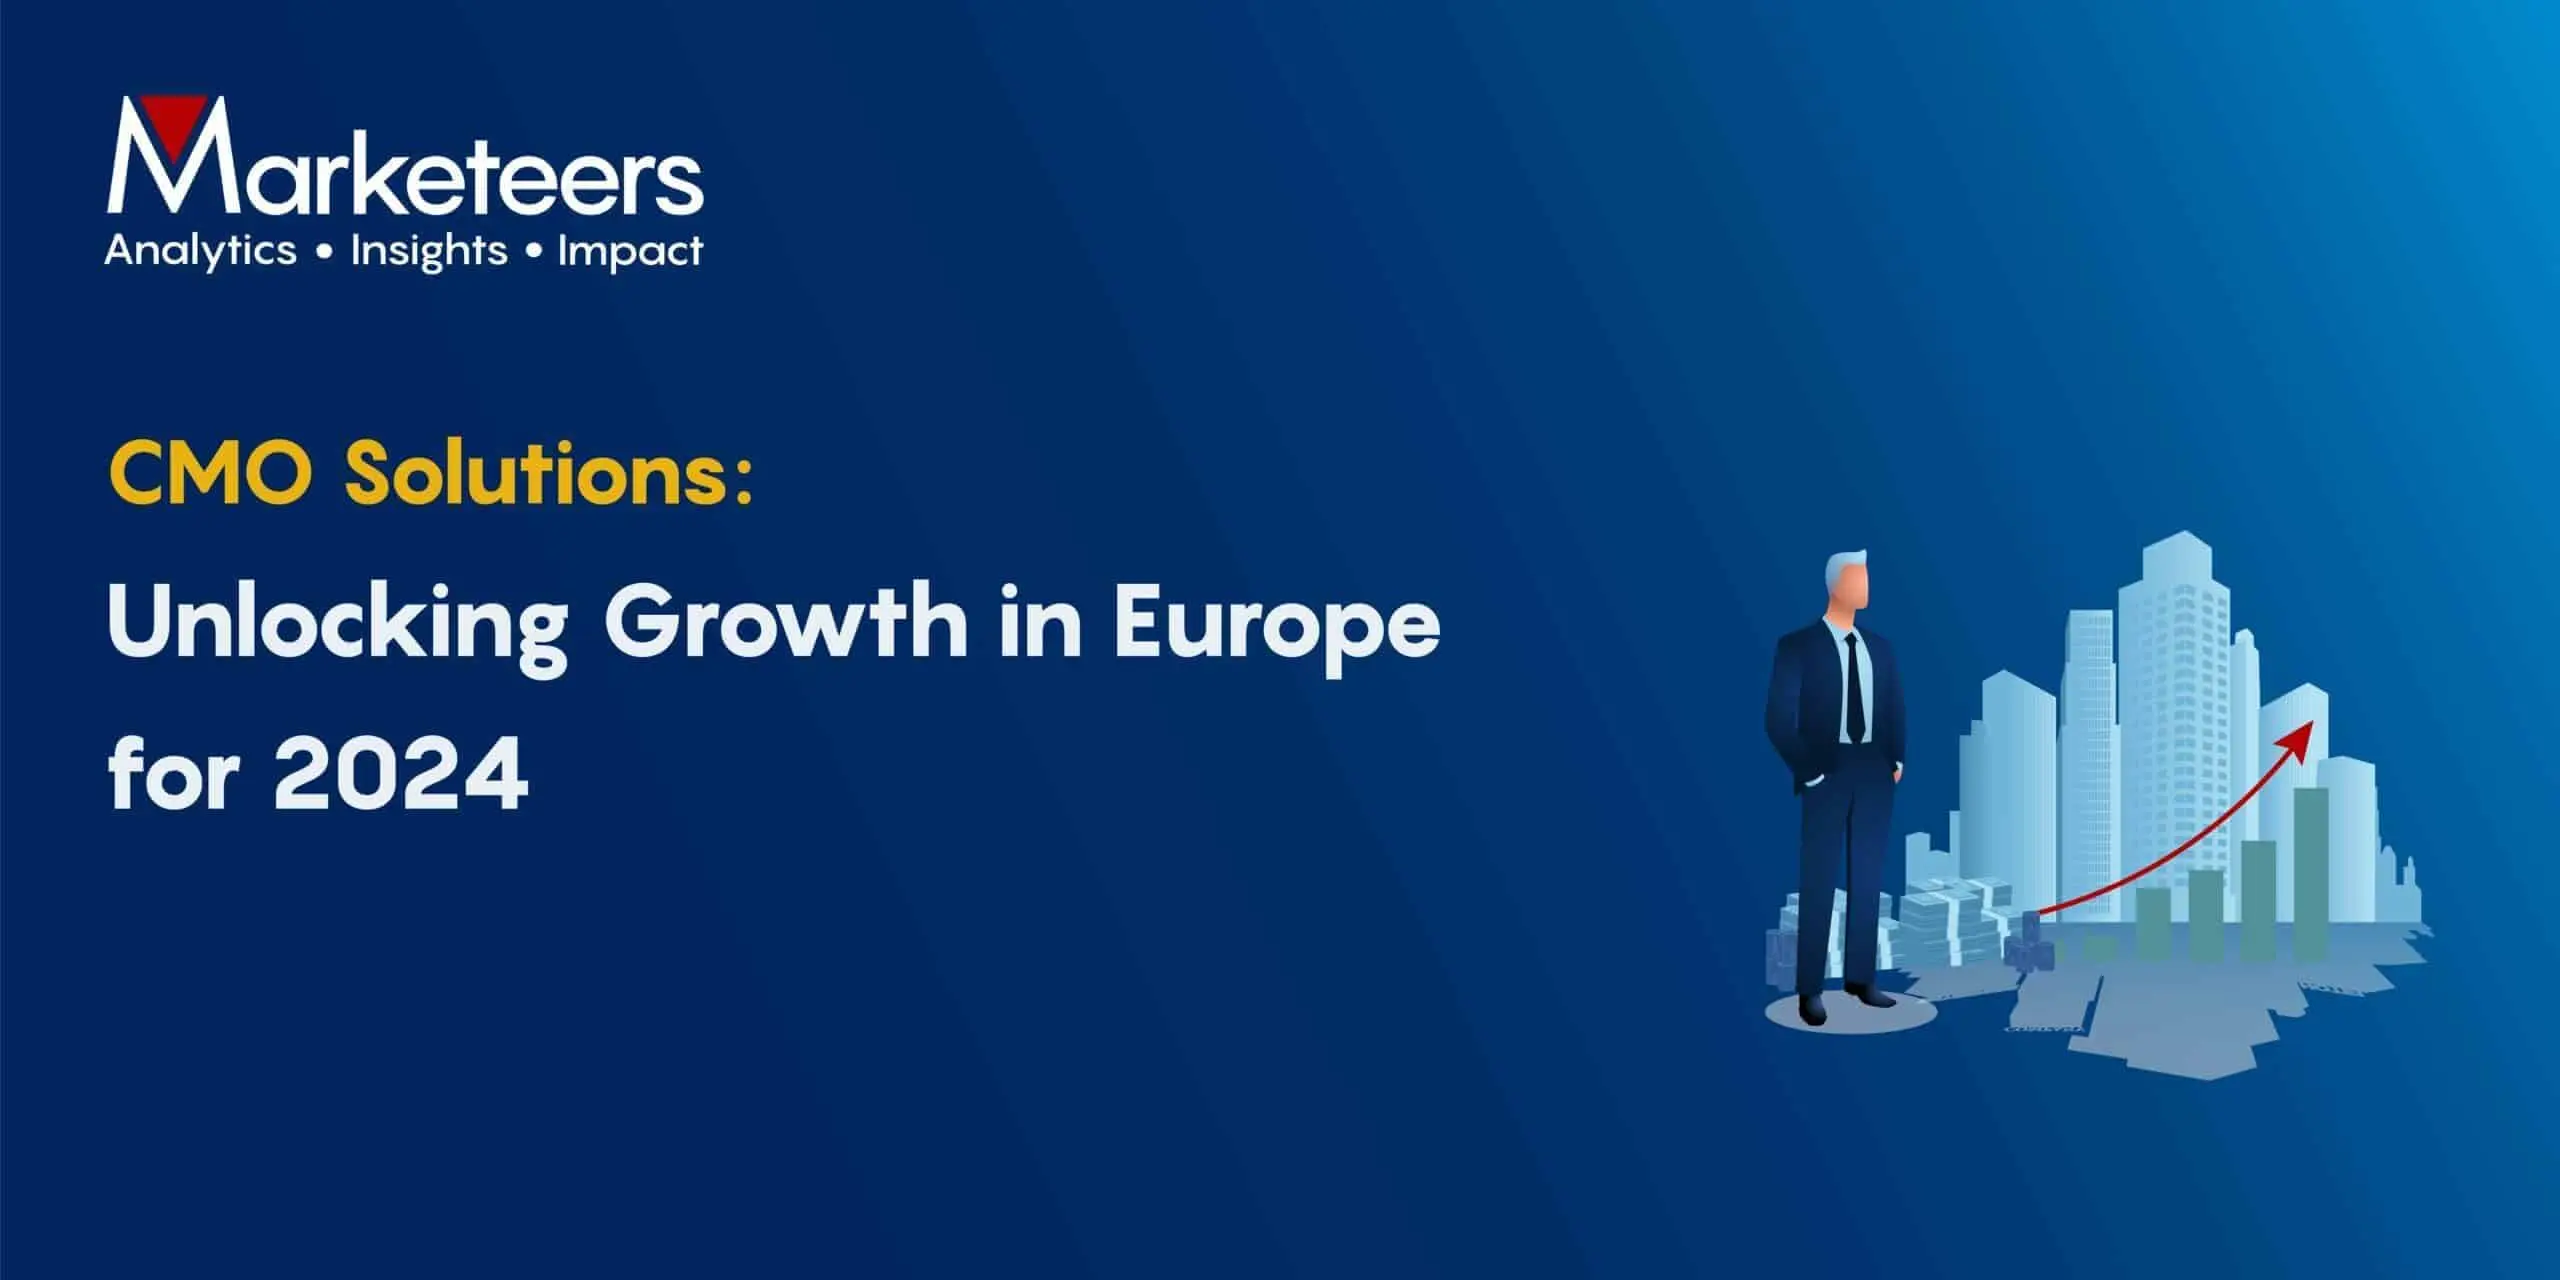 CMO SOLUTIONS UNLOCKING GROWTH IN EUROPE FOR 2024